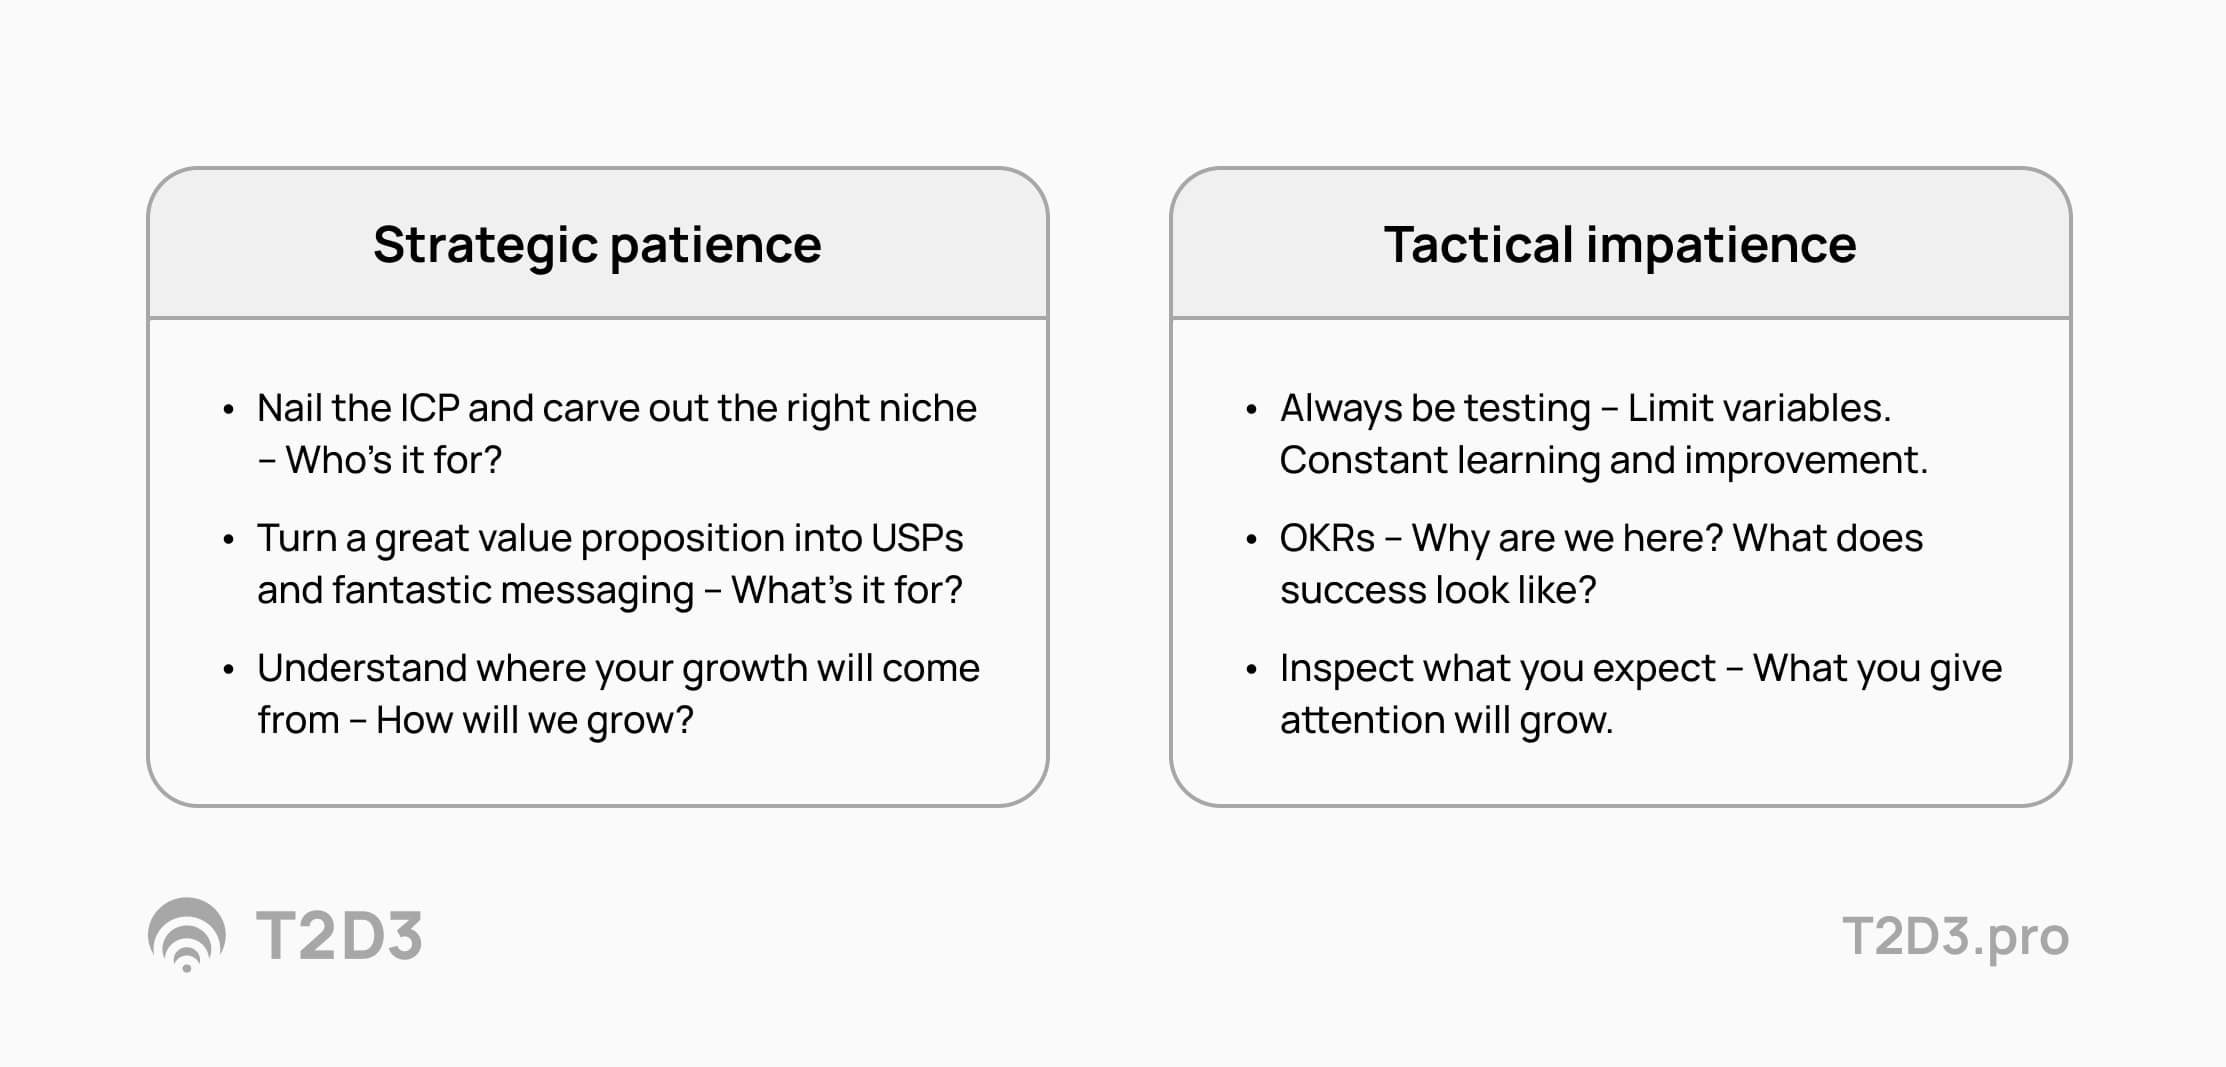 Marketing Leadership Balance tables showing features on both strategic patience and tactical impatience